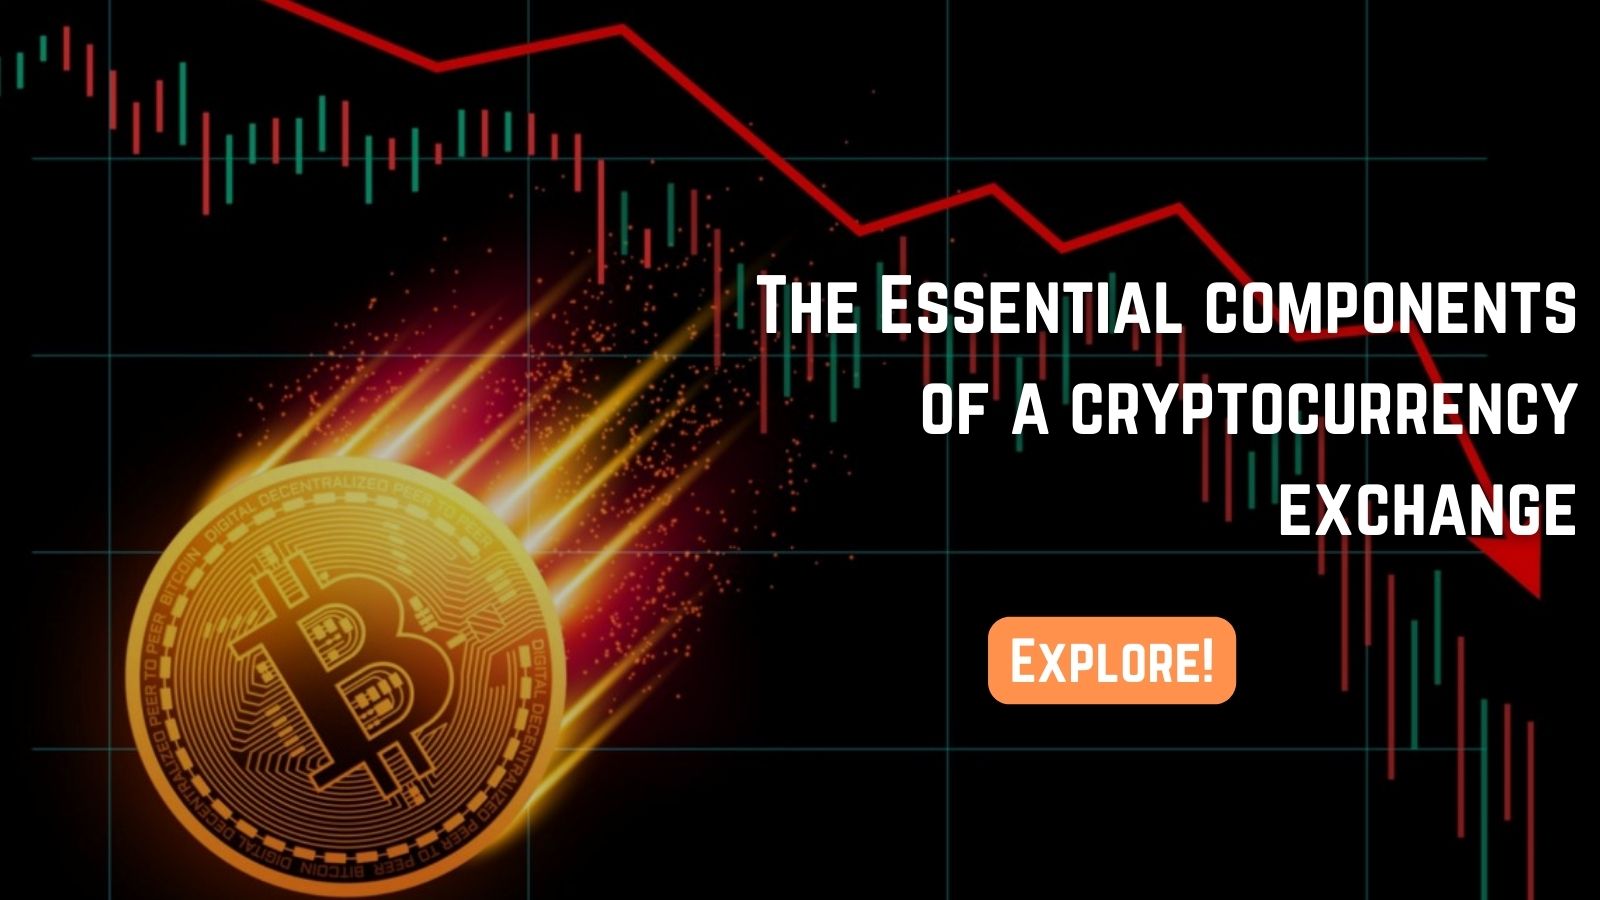 The Essential components of a cryptocurrency exchange